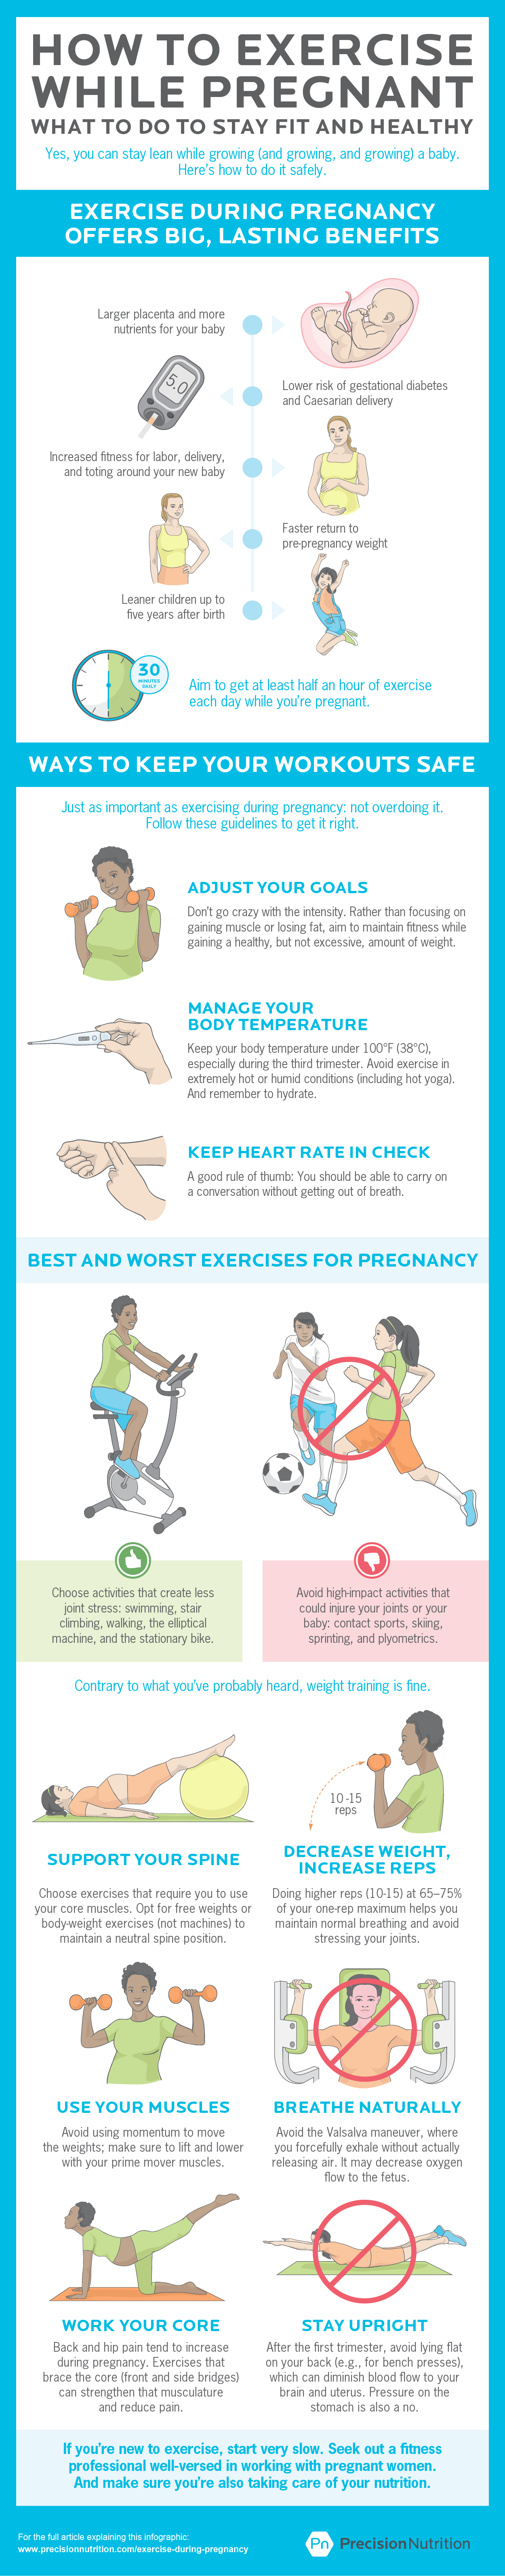 precision_nutrition_how_to_exercise_while_pregnant_post